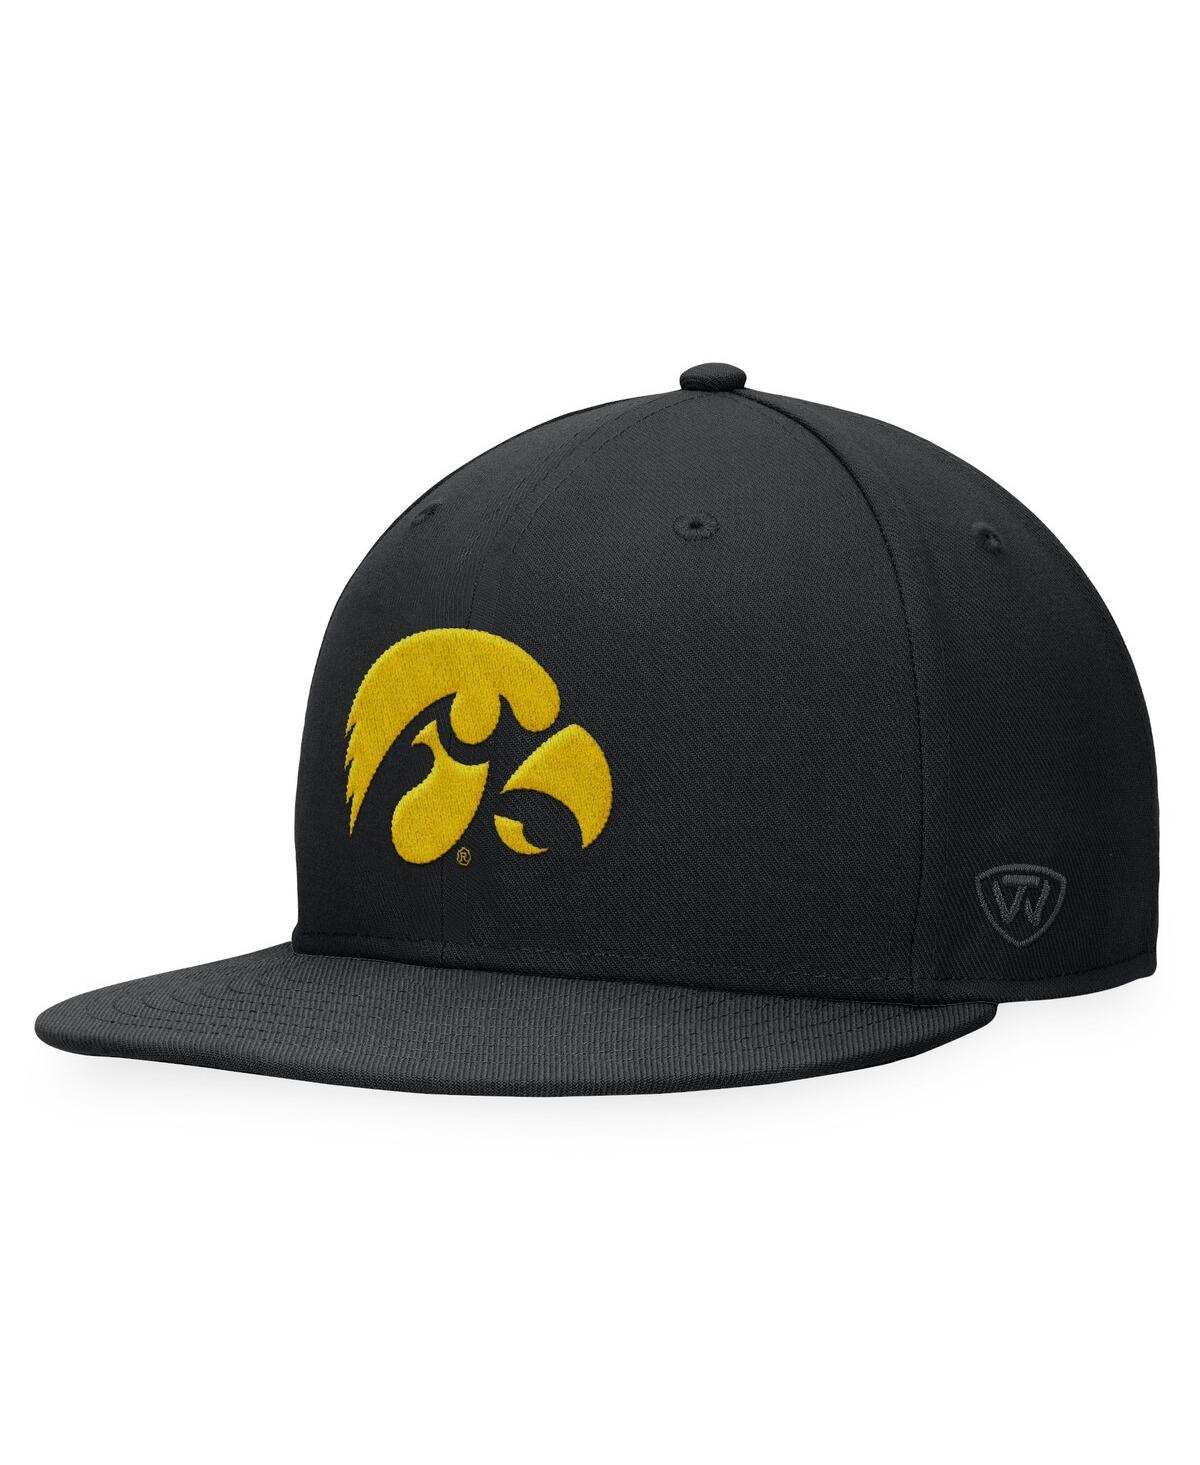 Top Of The World Black Iowa Hawkeyes Fitted Hat